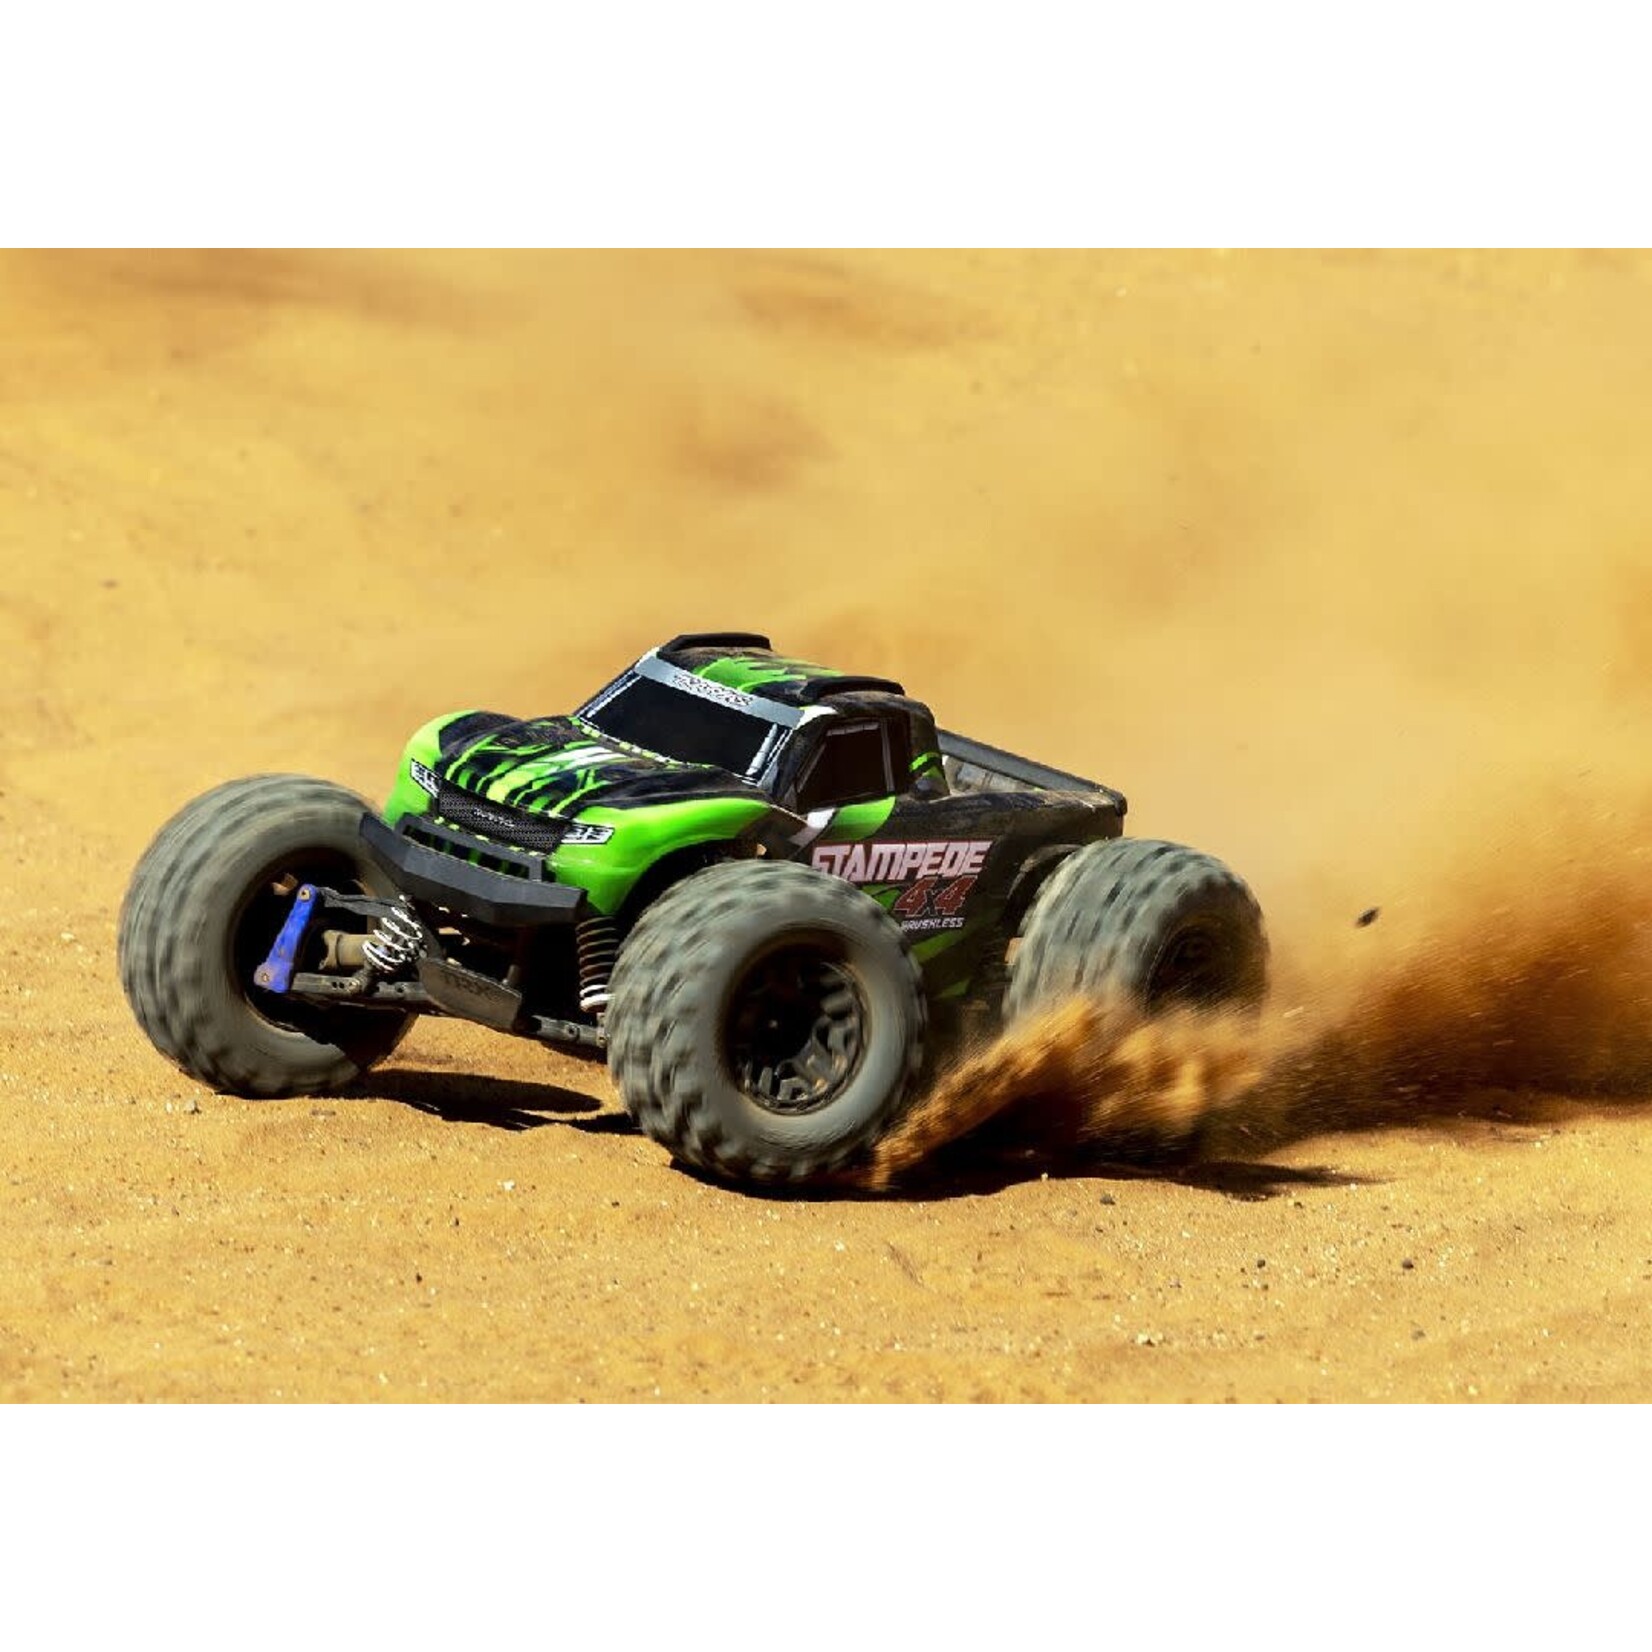 Traxxas 1/10 4X4  Stampede Monster Truck RTR BL w/ TQ 2.4GHz Radio and 2s ESC